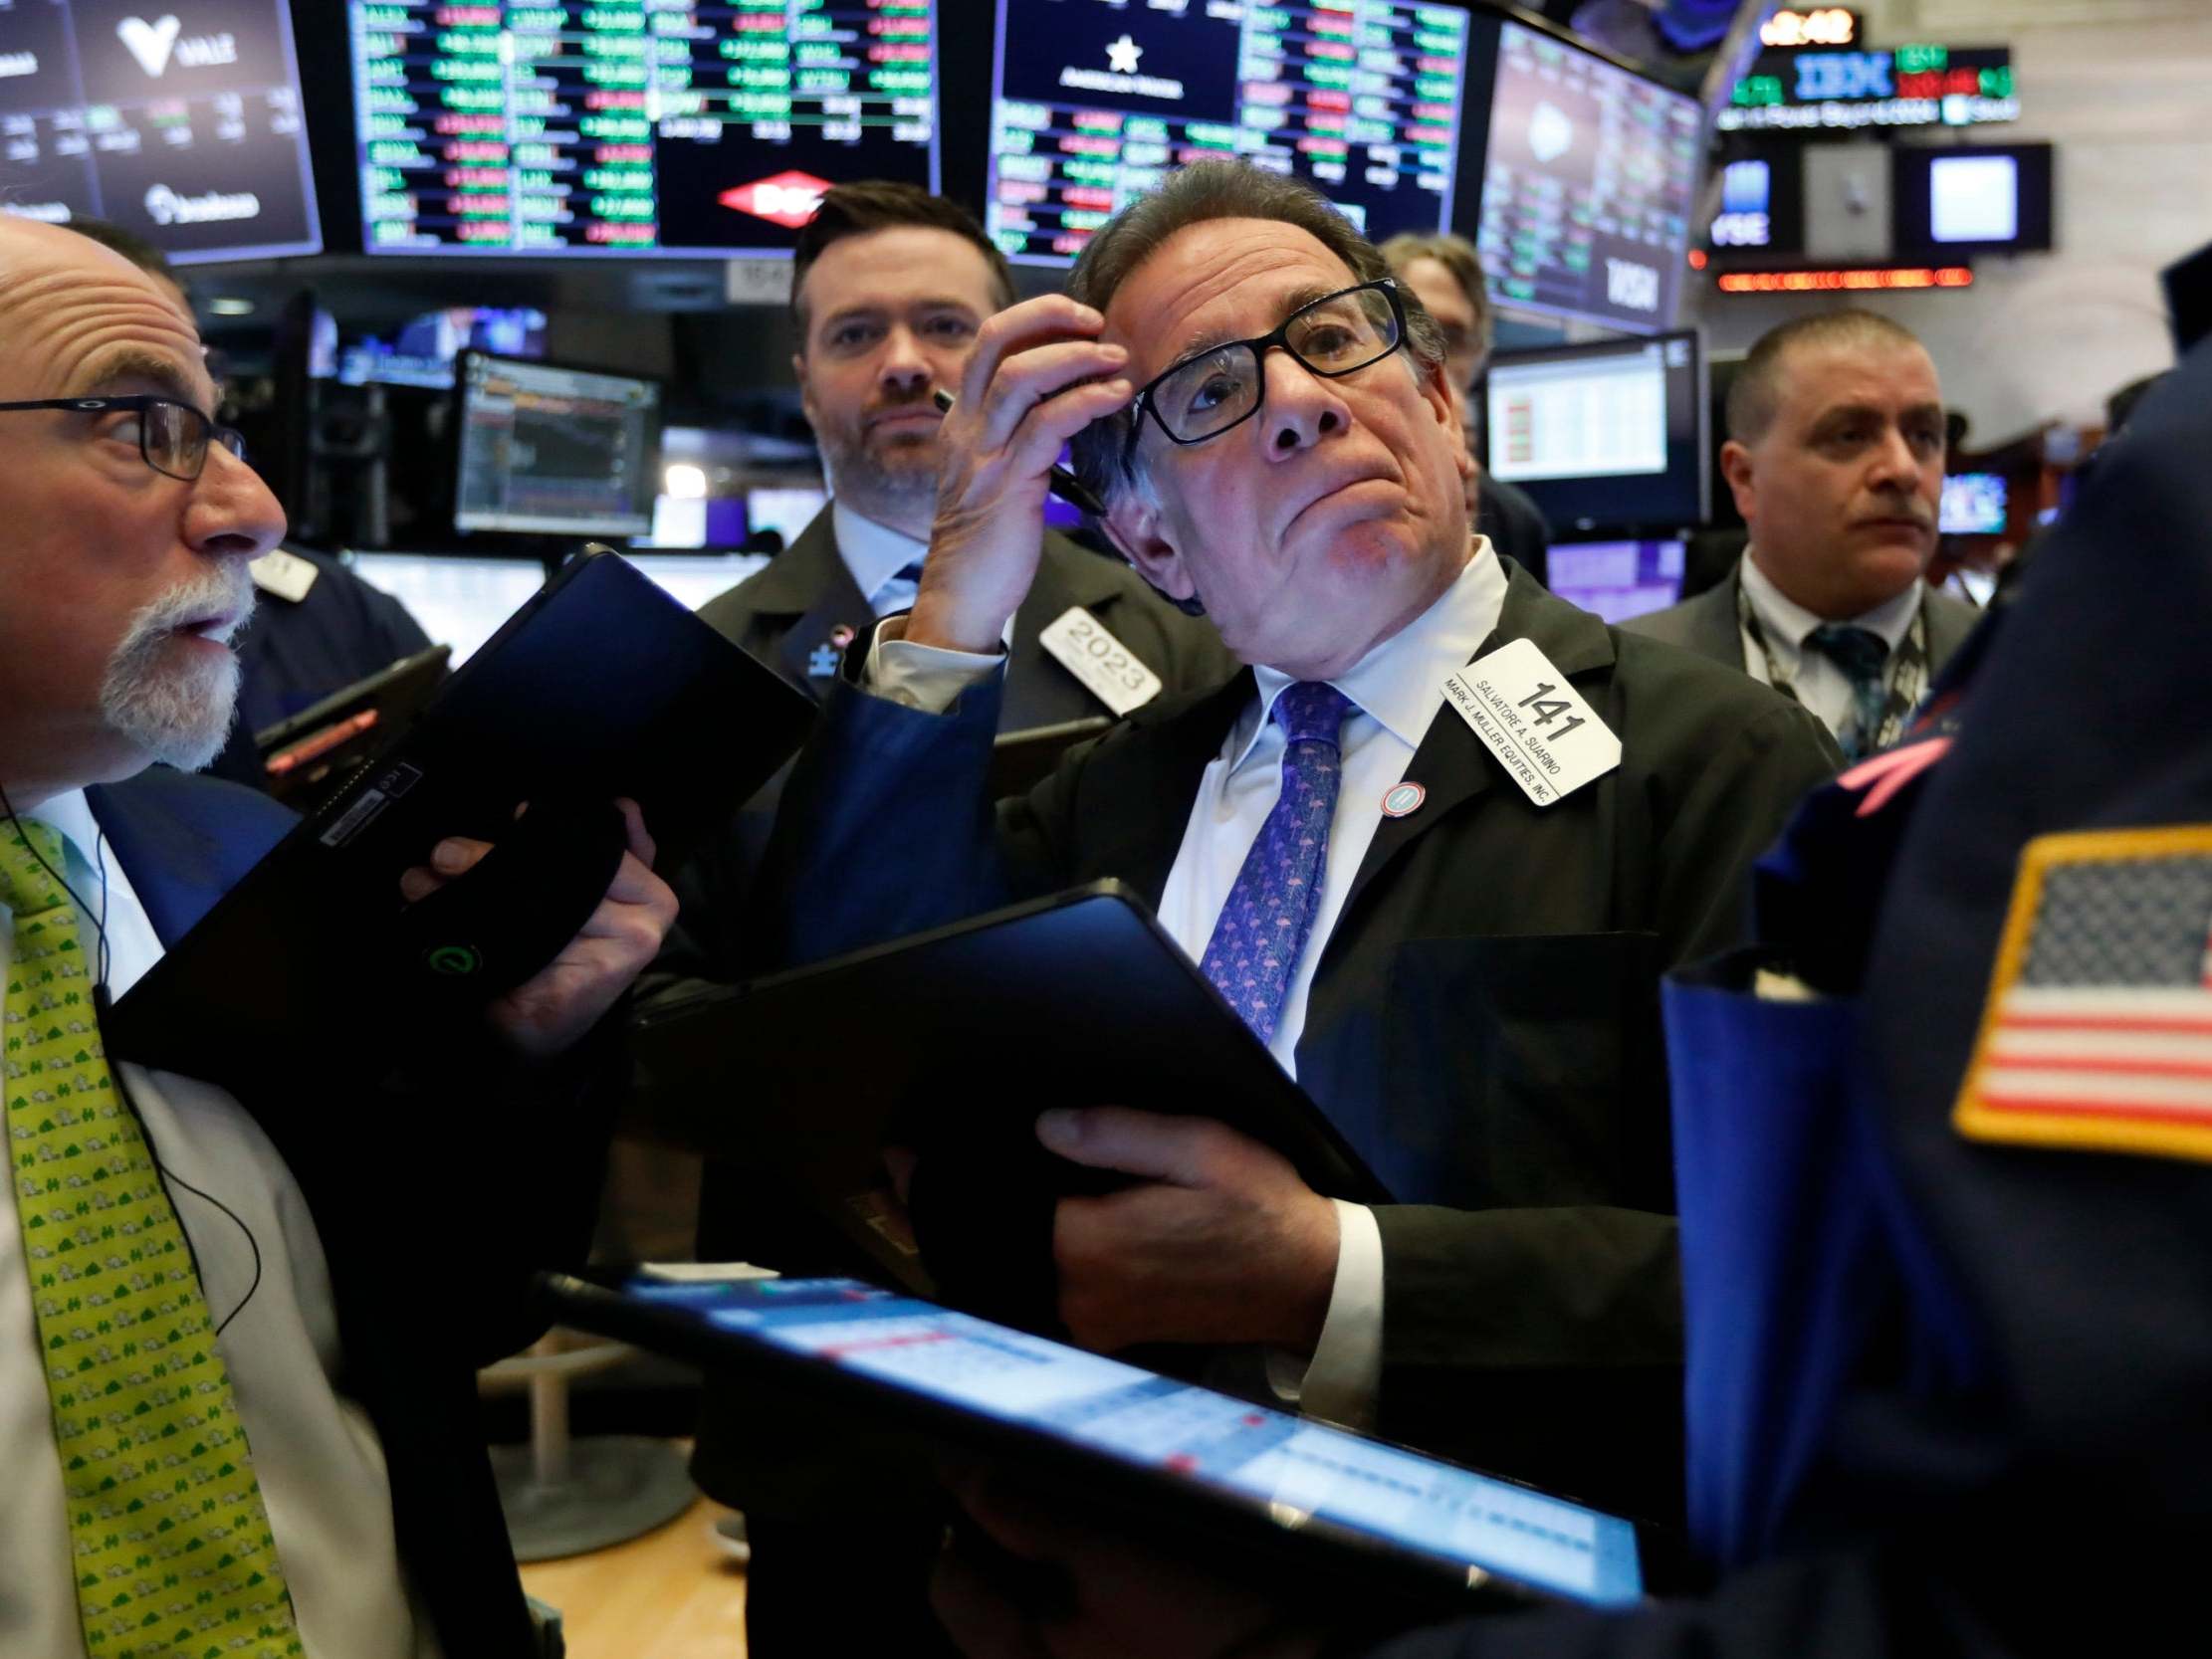 Traders were left scratching their heads after stocks tumbled on Monday